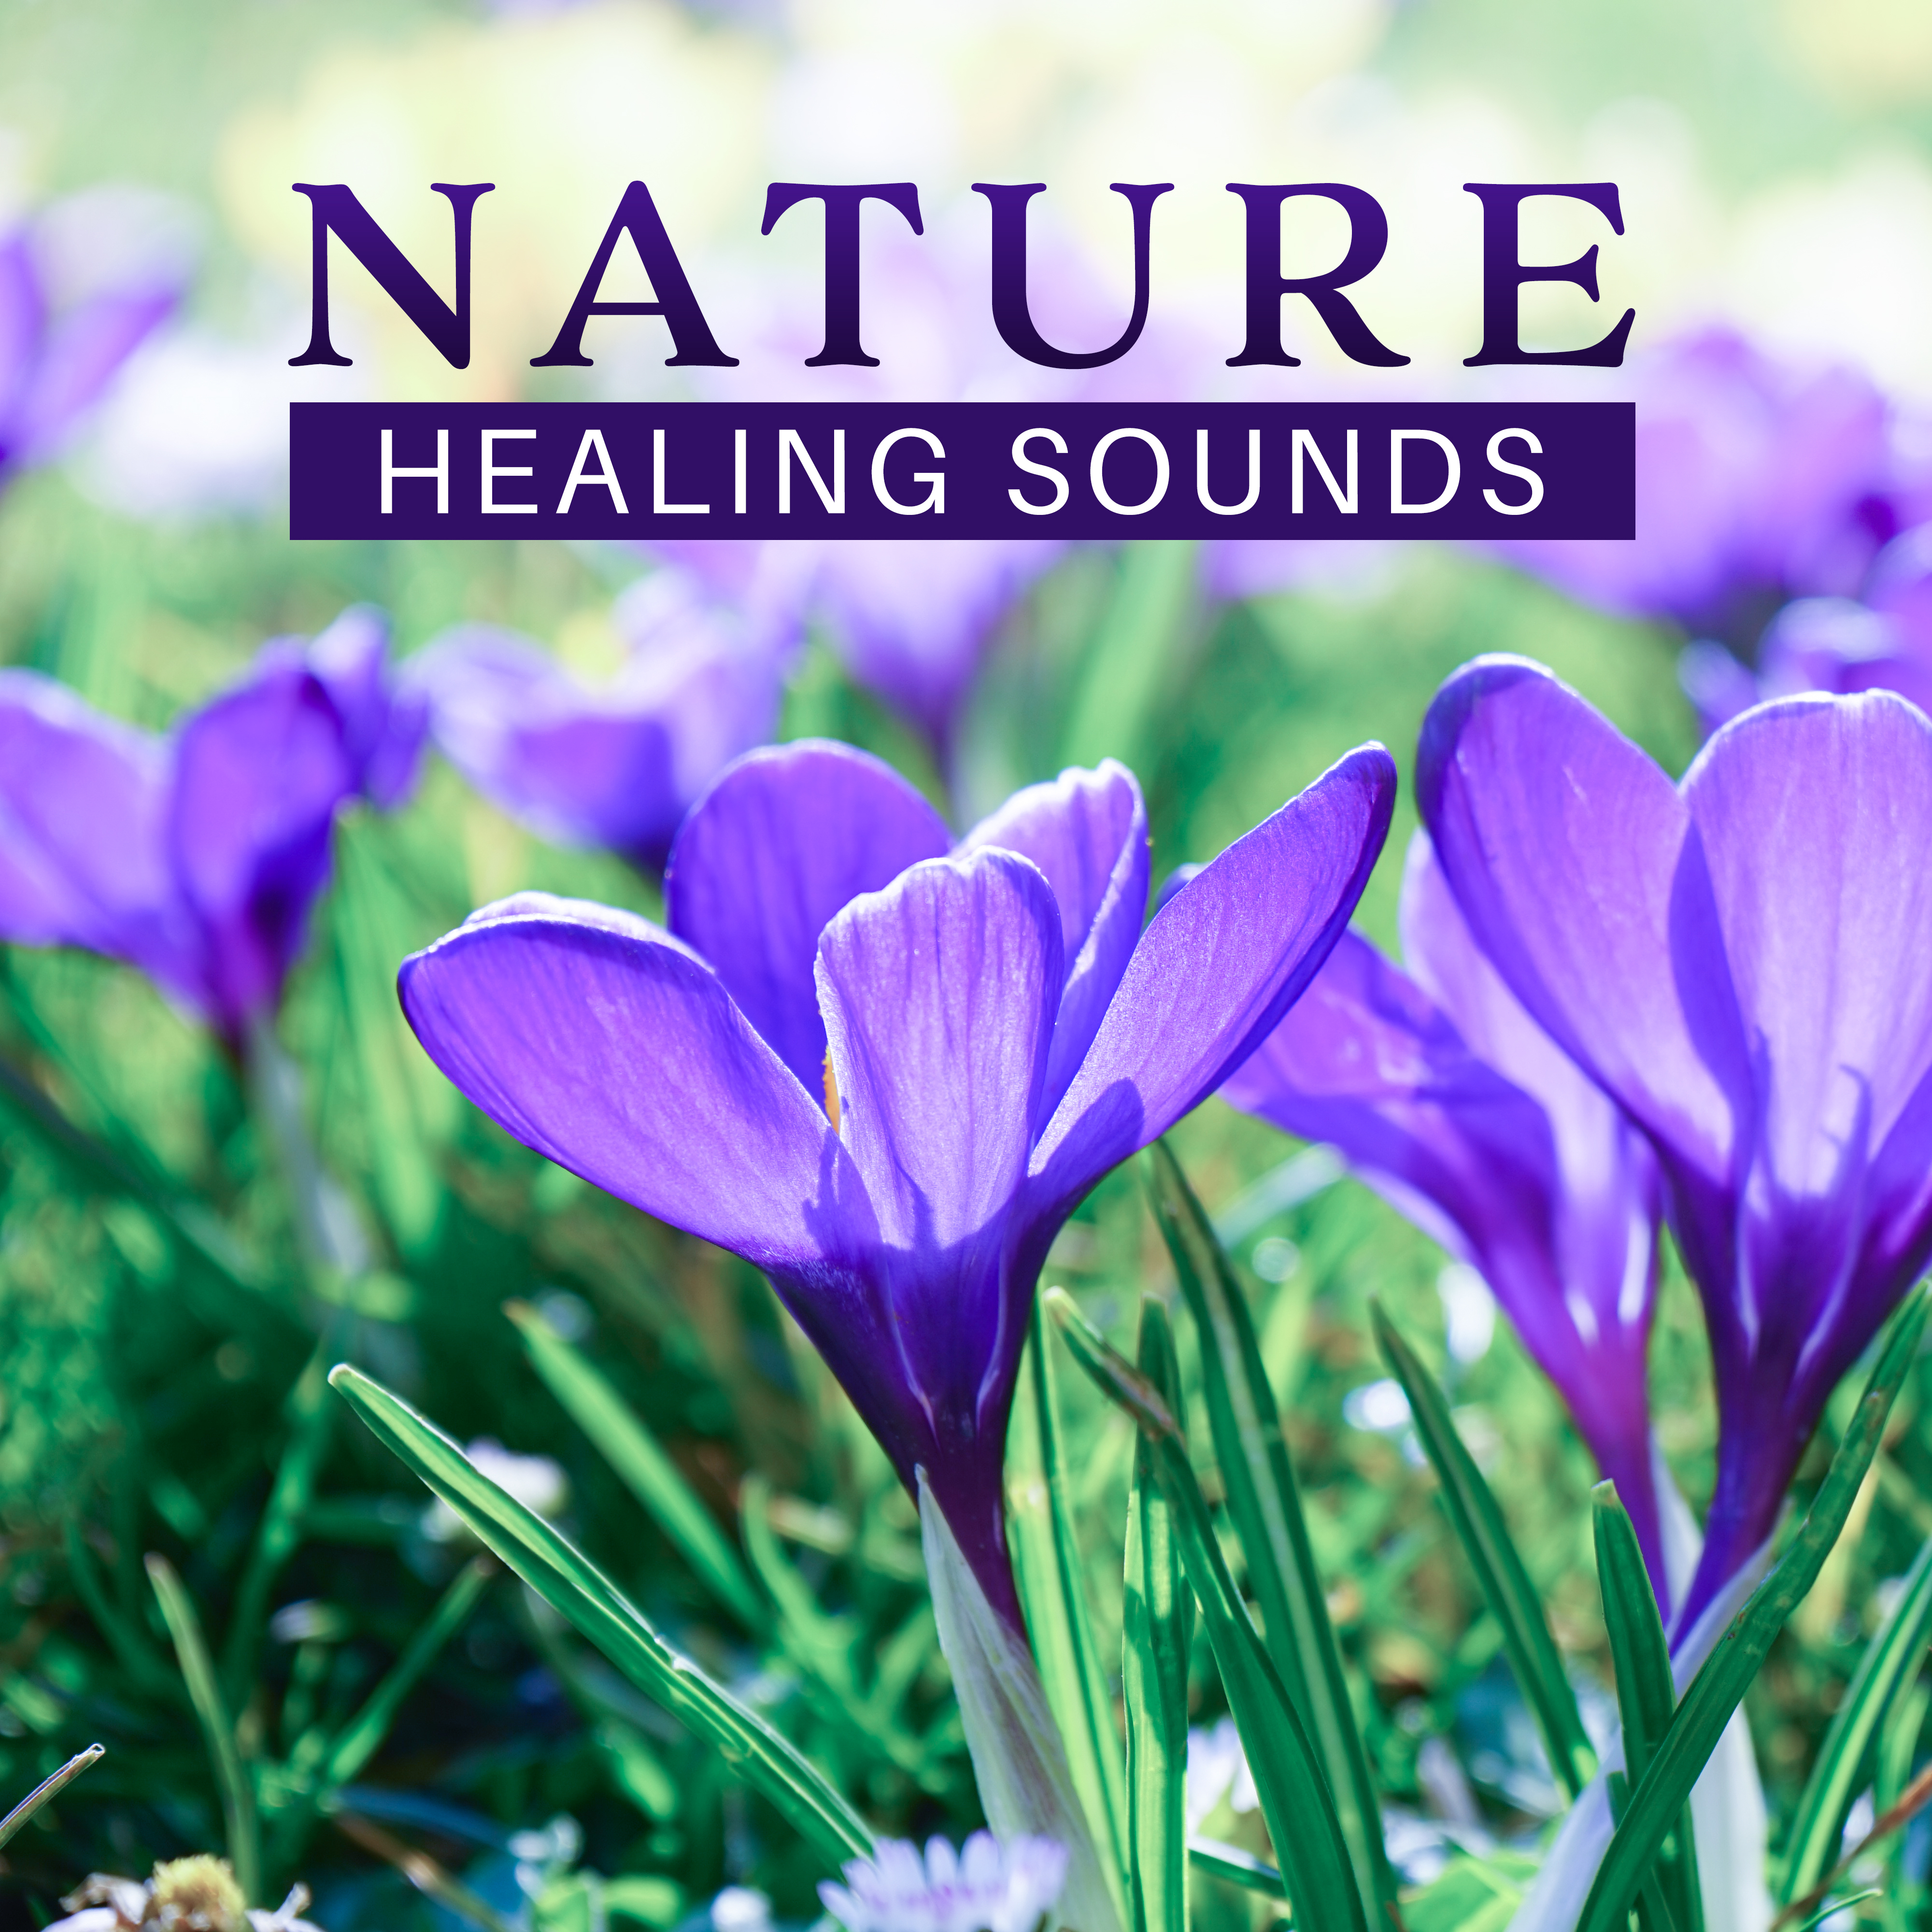 Nature Healing Sounds – Soft Sounds to Calm Down, Rest with New Age, Mind Relaxation, Harmony Soul, Time to Chill